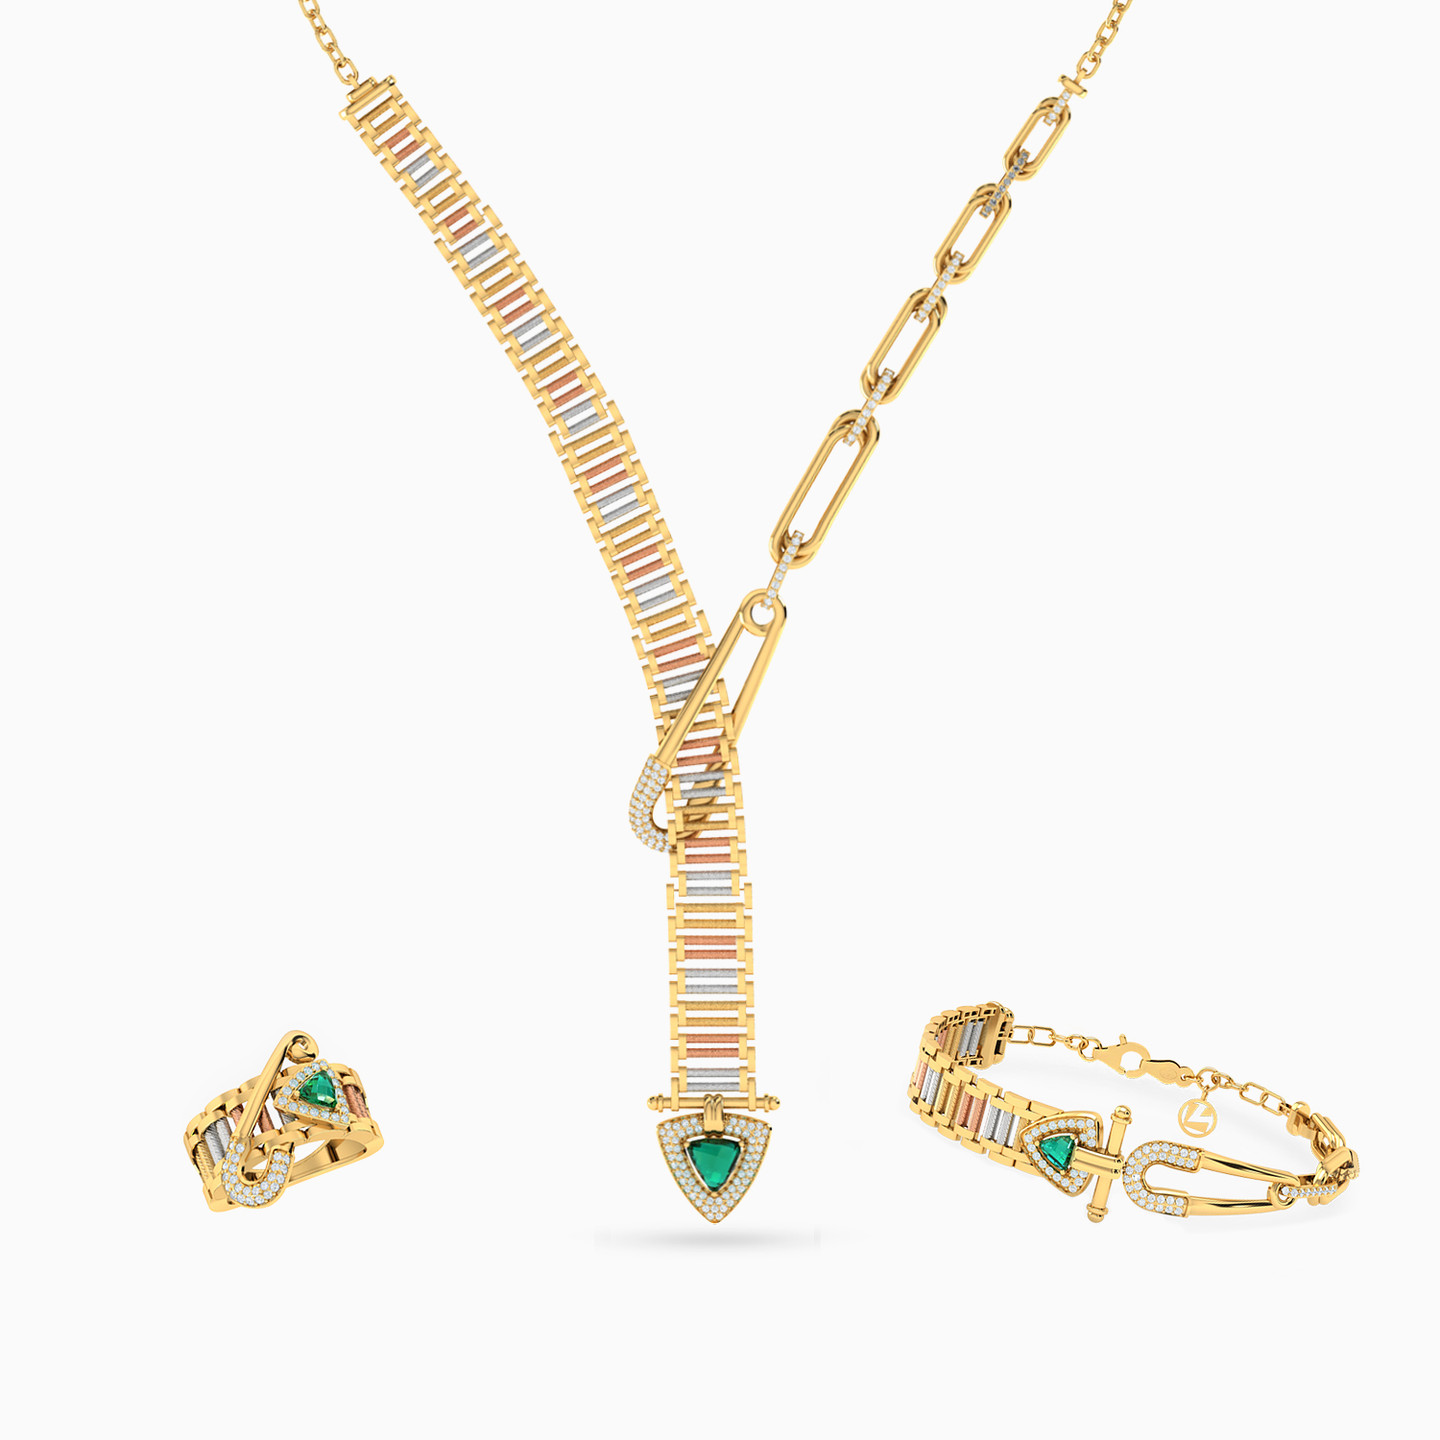 18K Gold Colored Stones Jewelry Set - 3 Pieces